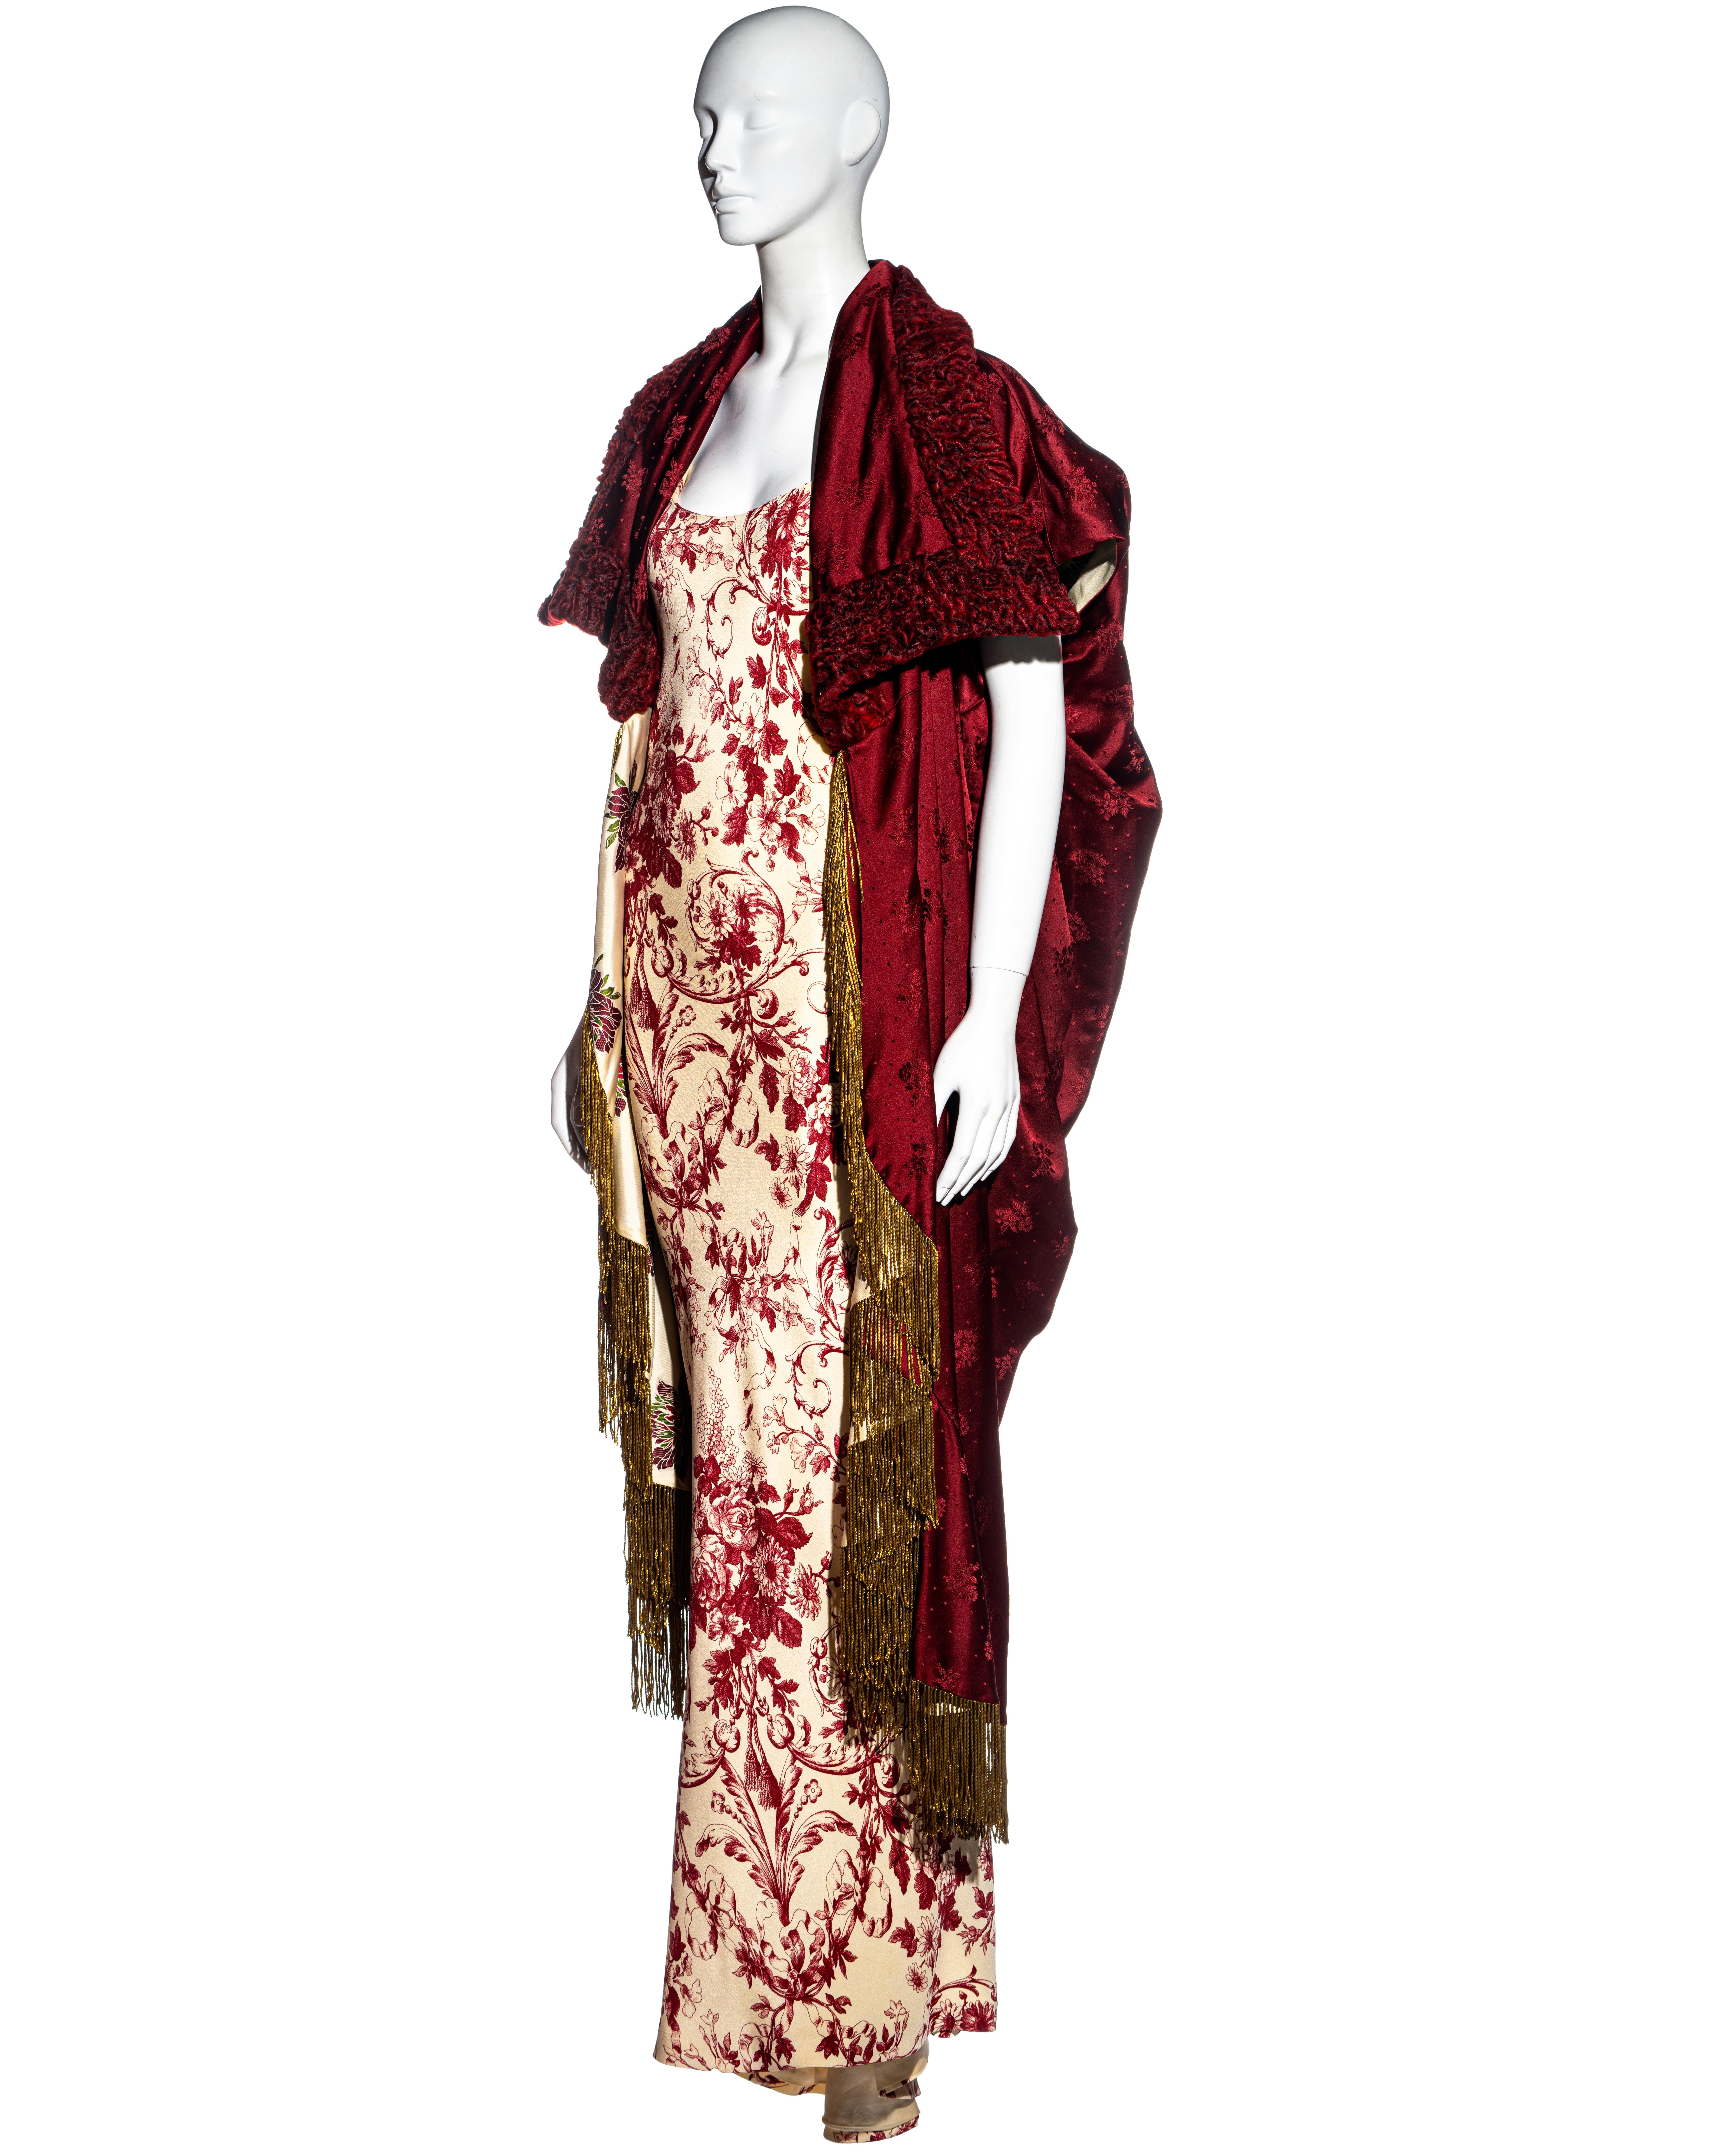 ▪ Christian Dior evening dress and coat set 
▪ Designed by John Galliano 
▪ Red and cream floral printed evening dress with train 
▪ Red silk jacquard reversible cocoon coat 
▪ Persian lamb collar 
▪ Gold metal chain fringes 
▪ FR 40 - UK 12 - IT